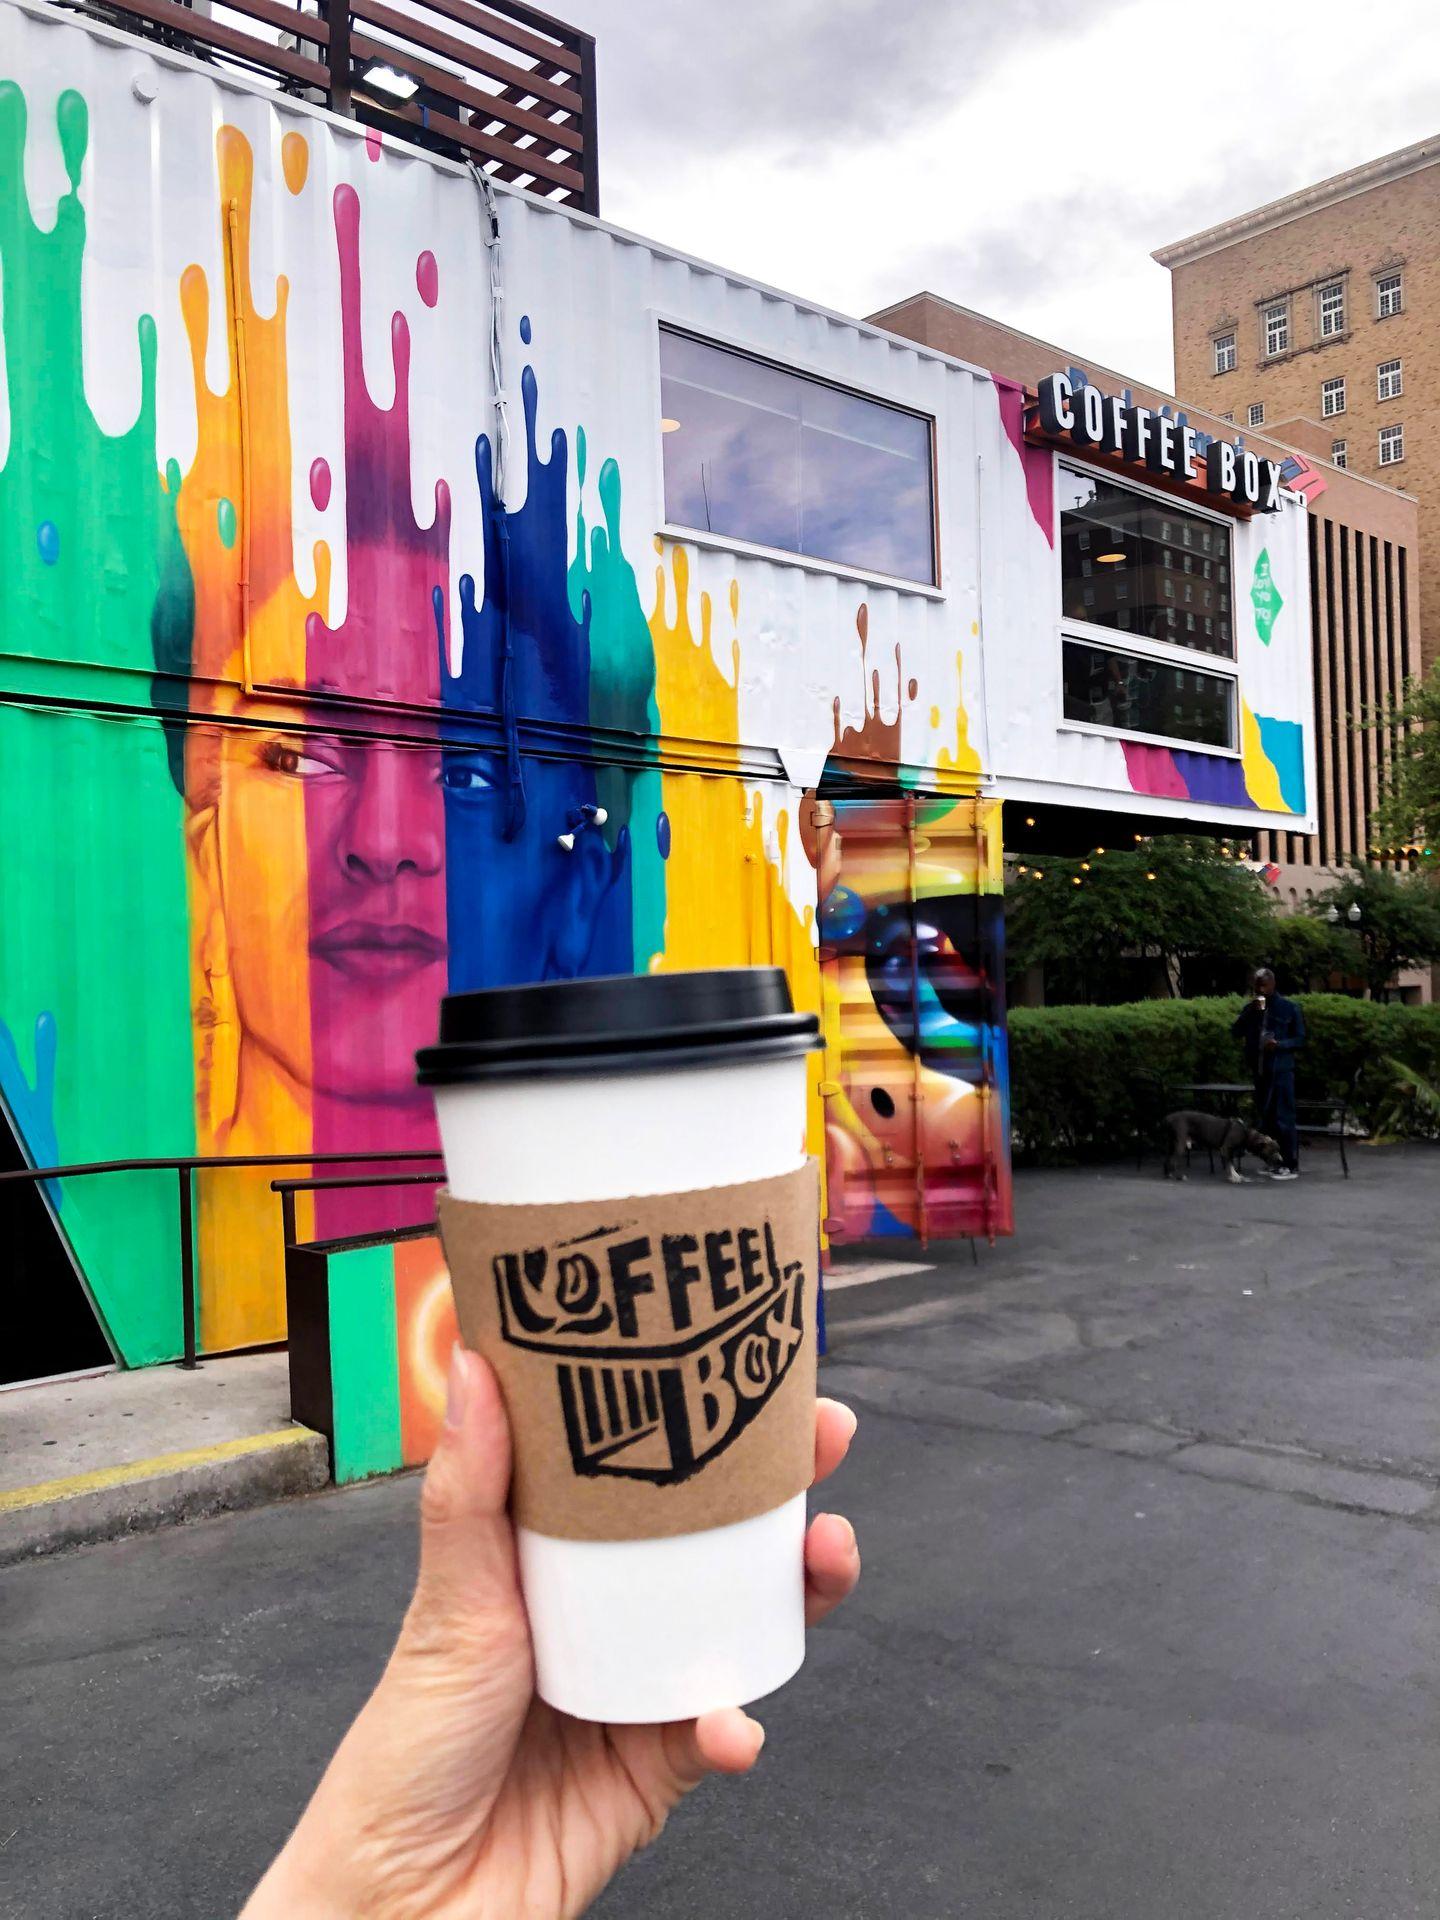 Holding up a coffee mug with a coffee shop made of shipping containers behind it. The building is painted with bright colors that look like a splash of paint.